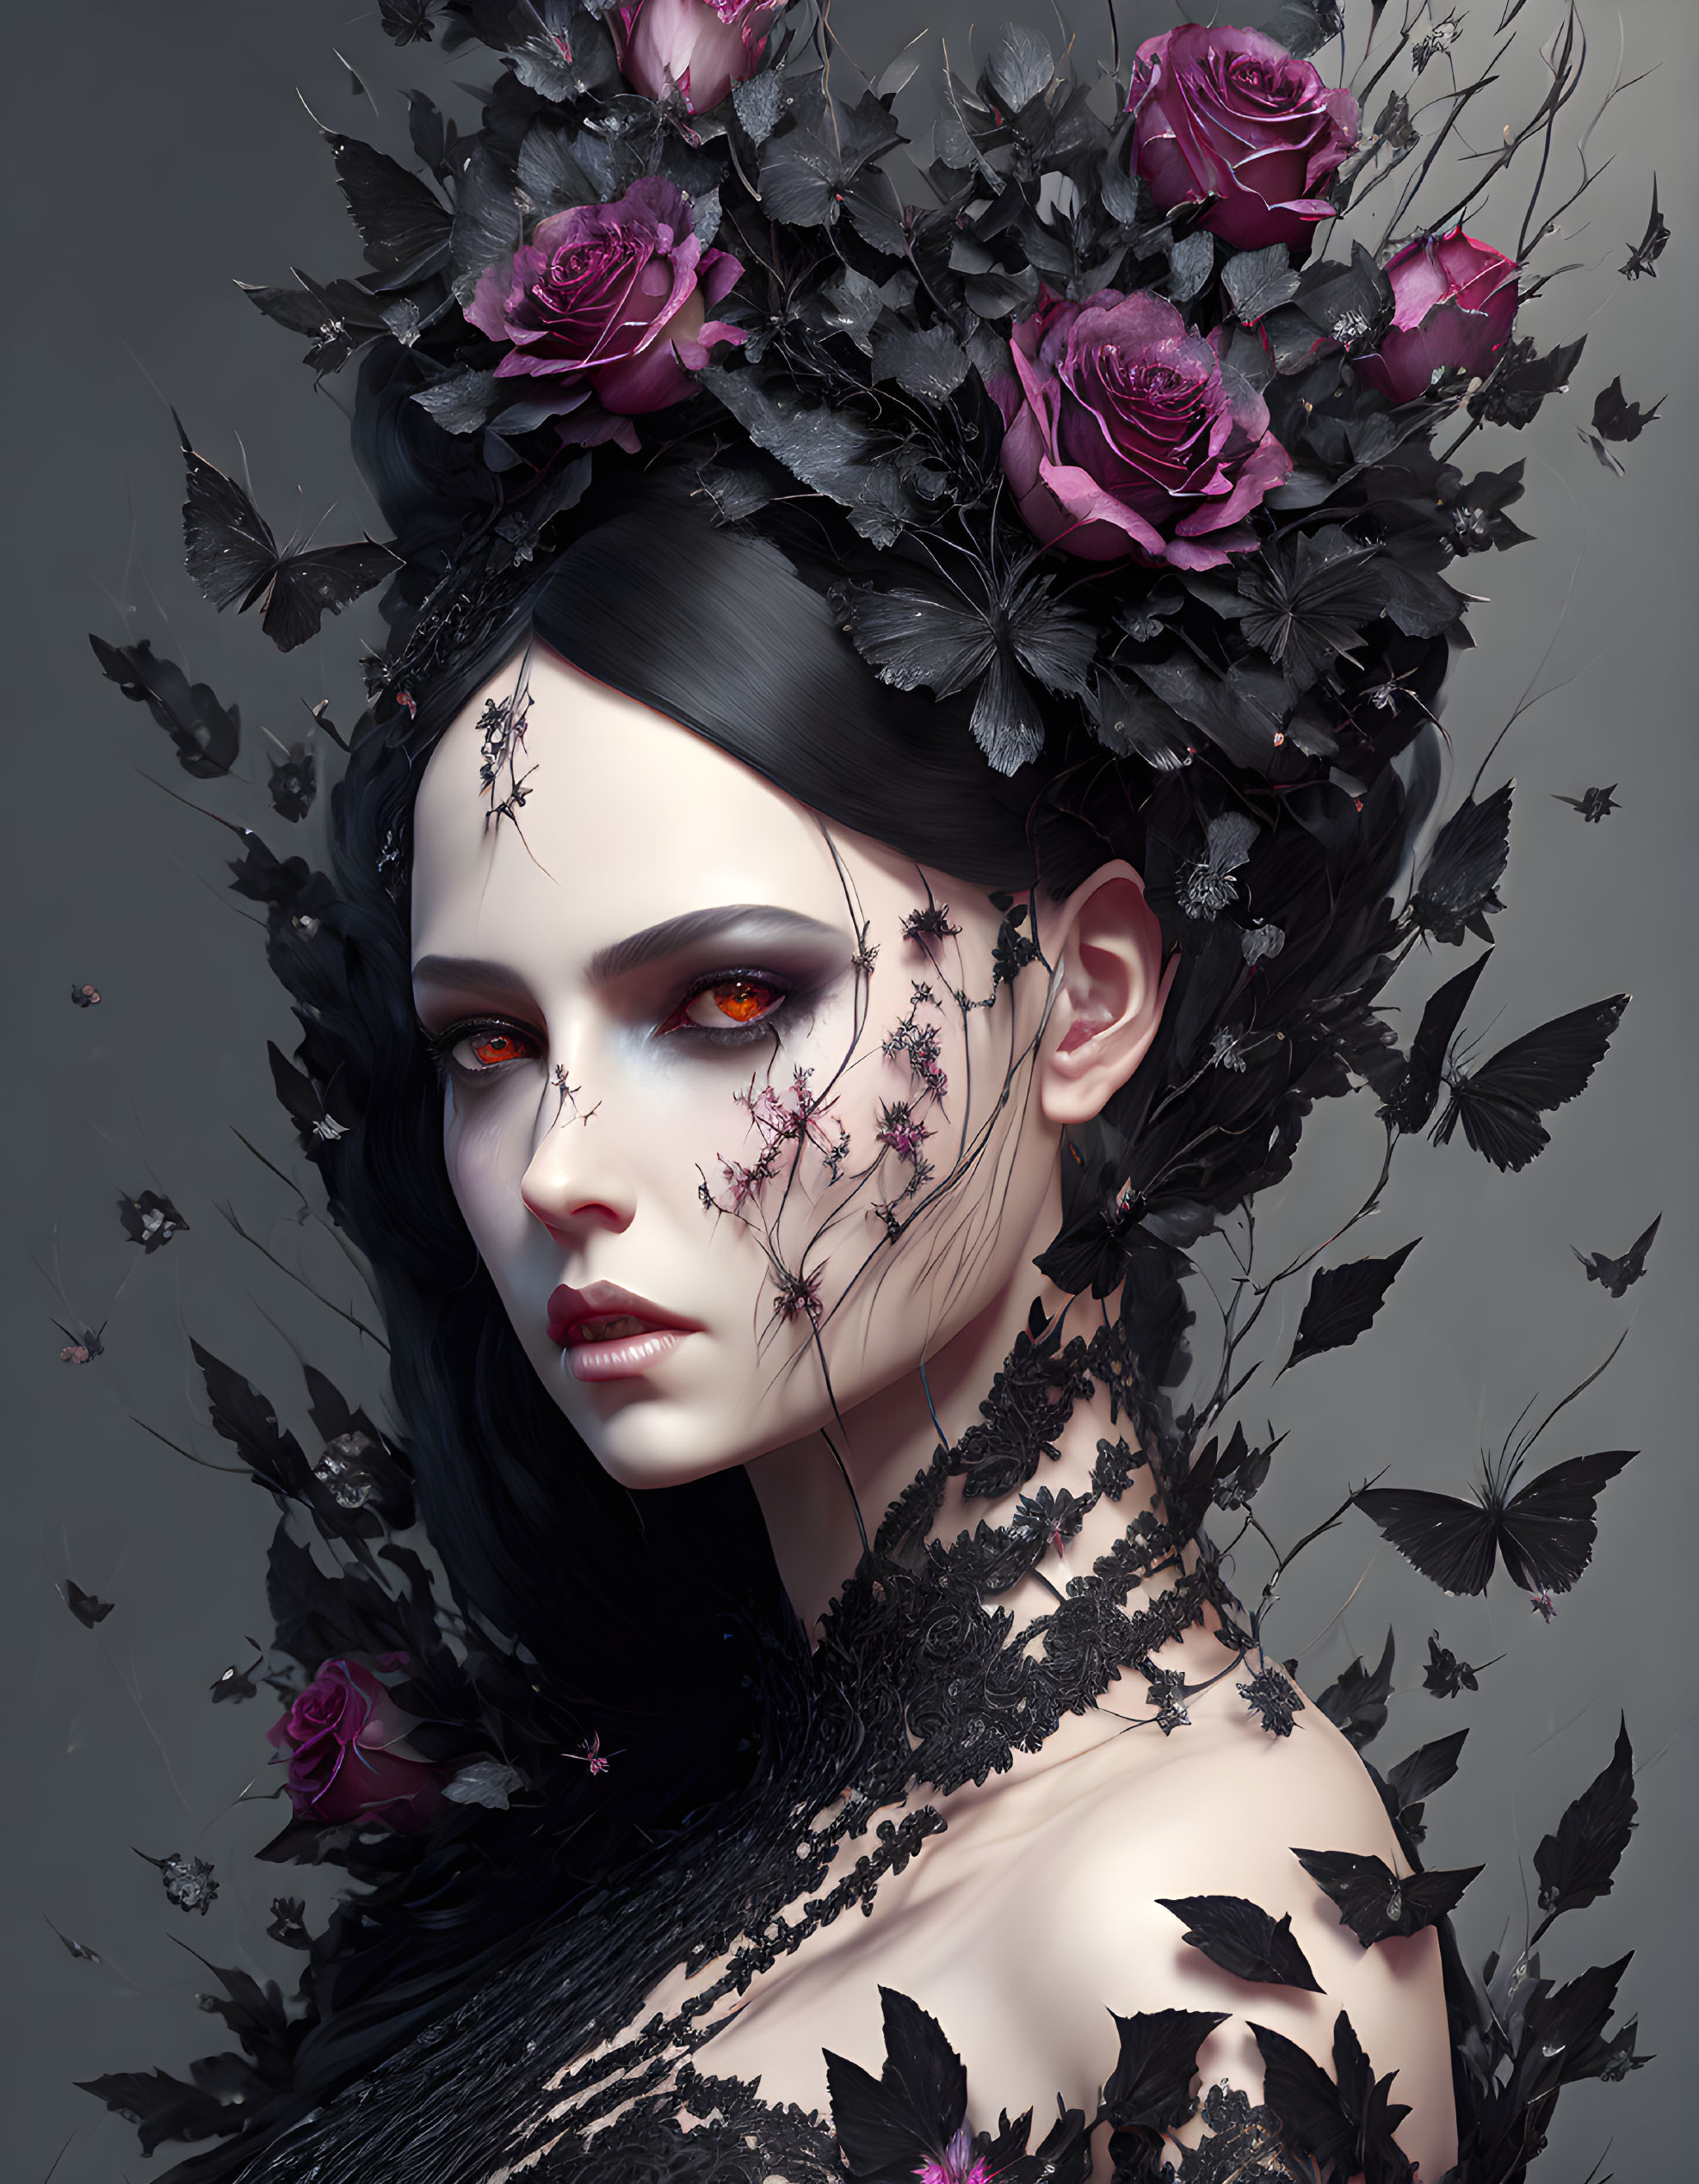 Stylized portrait of a woman with dark makeup and black crown of branches and roses